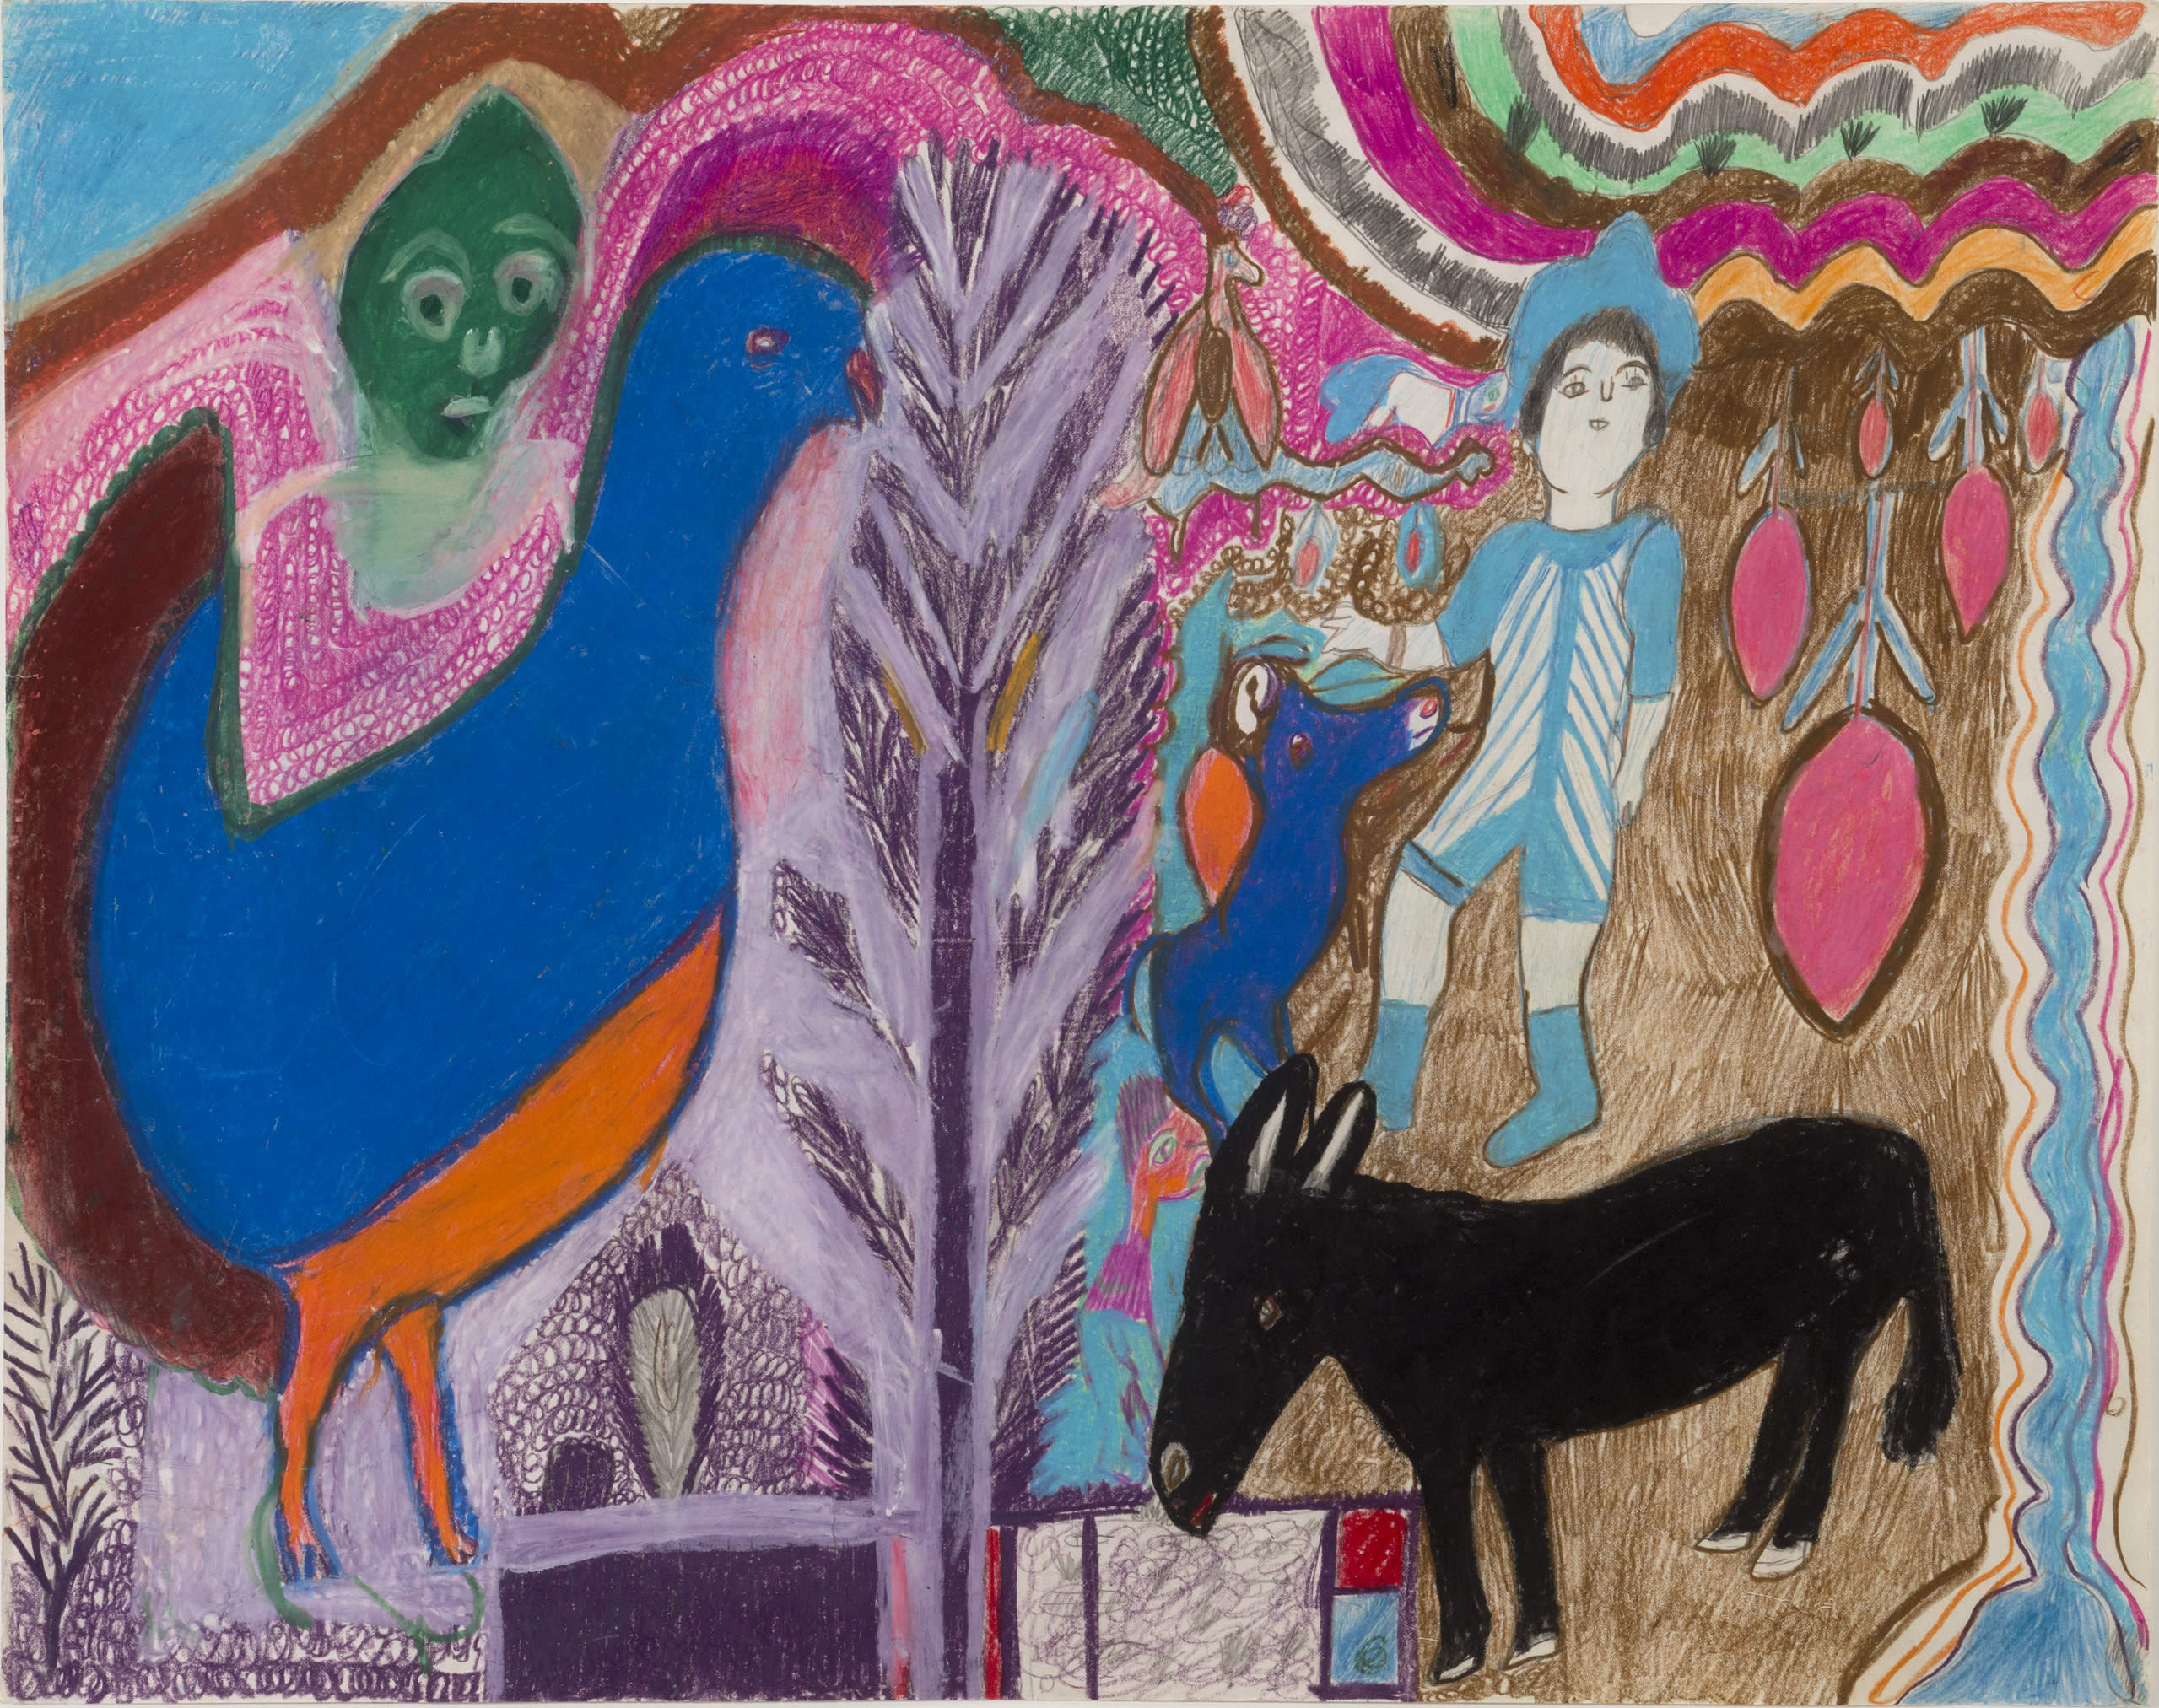 A vividly colored drawing of multiple elements including a large blue bird at the left, over which hovers a green face. In the center is a purple tree.To the right are a black donkey, a figure dressed in light blue stripes and a dark blue dog.